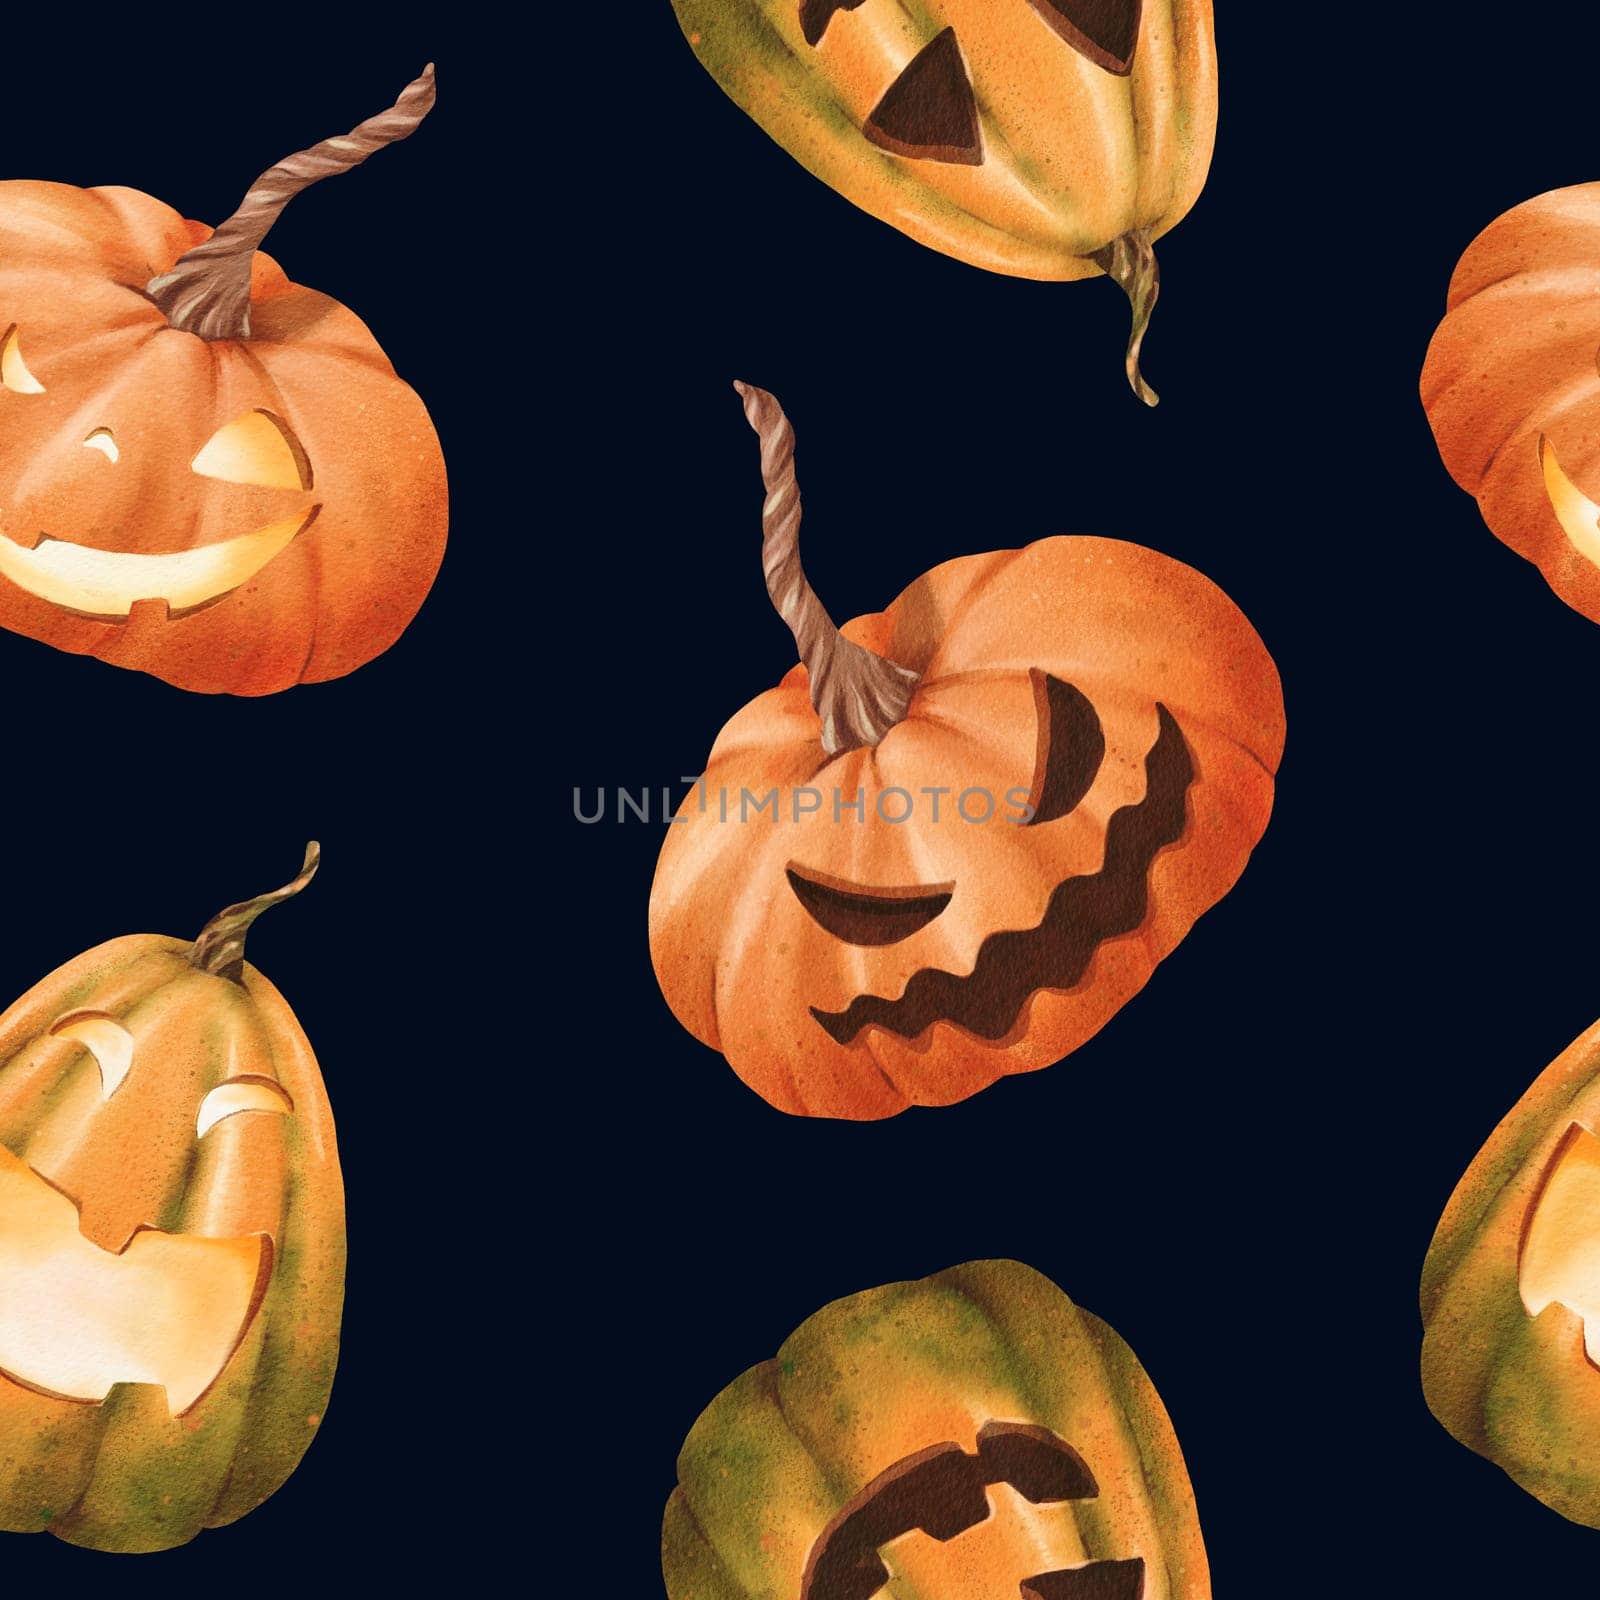 Seamless Halloween pattern with bright orange pumpkins sporting carved faces, capturing classic holiday motifs. Watercolor illustration suitable for packaging, textiles, and books.